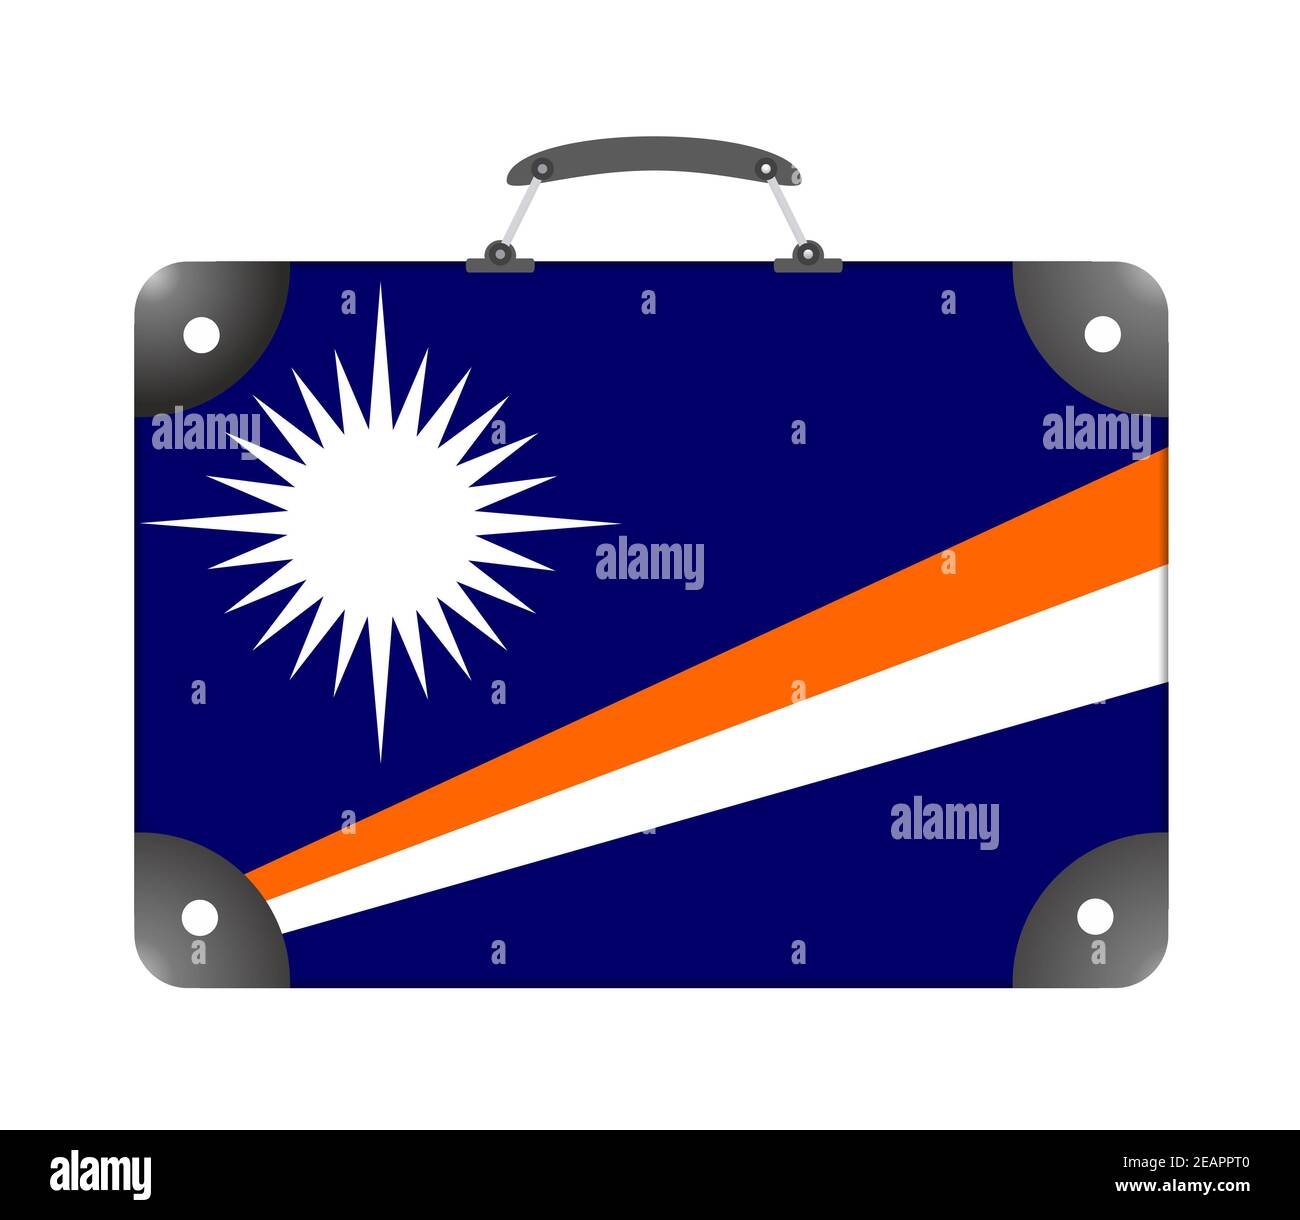 Marshall Islands flag in the form of a travel suitcase on a white background Stock Photo